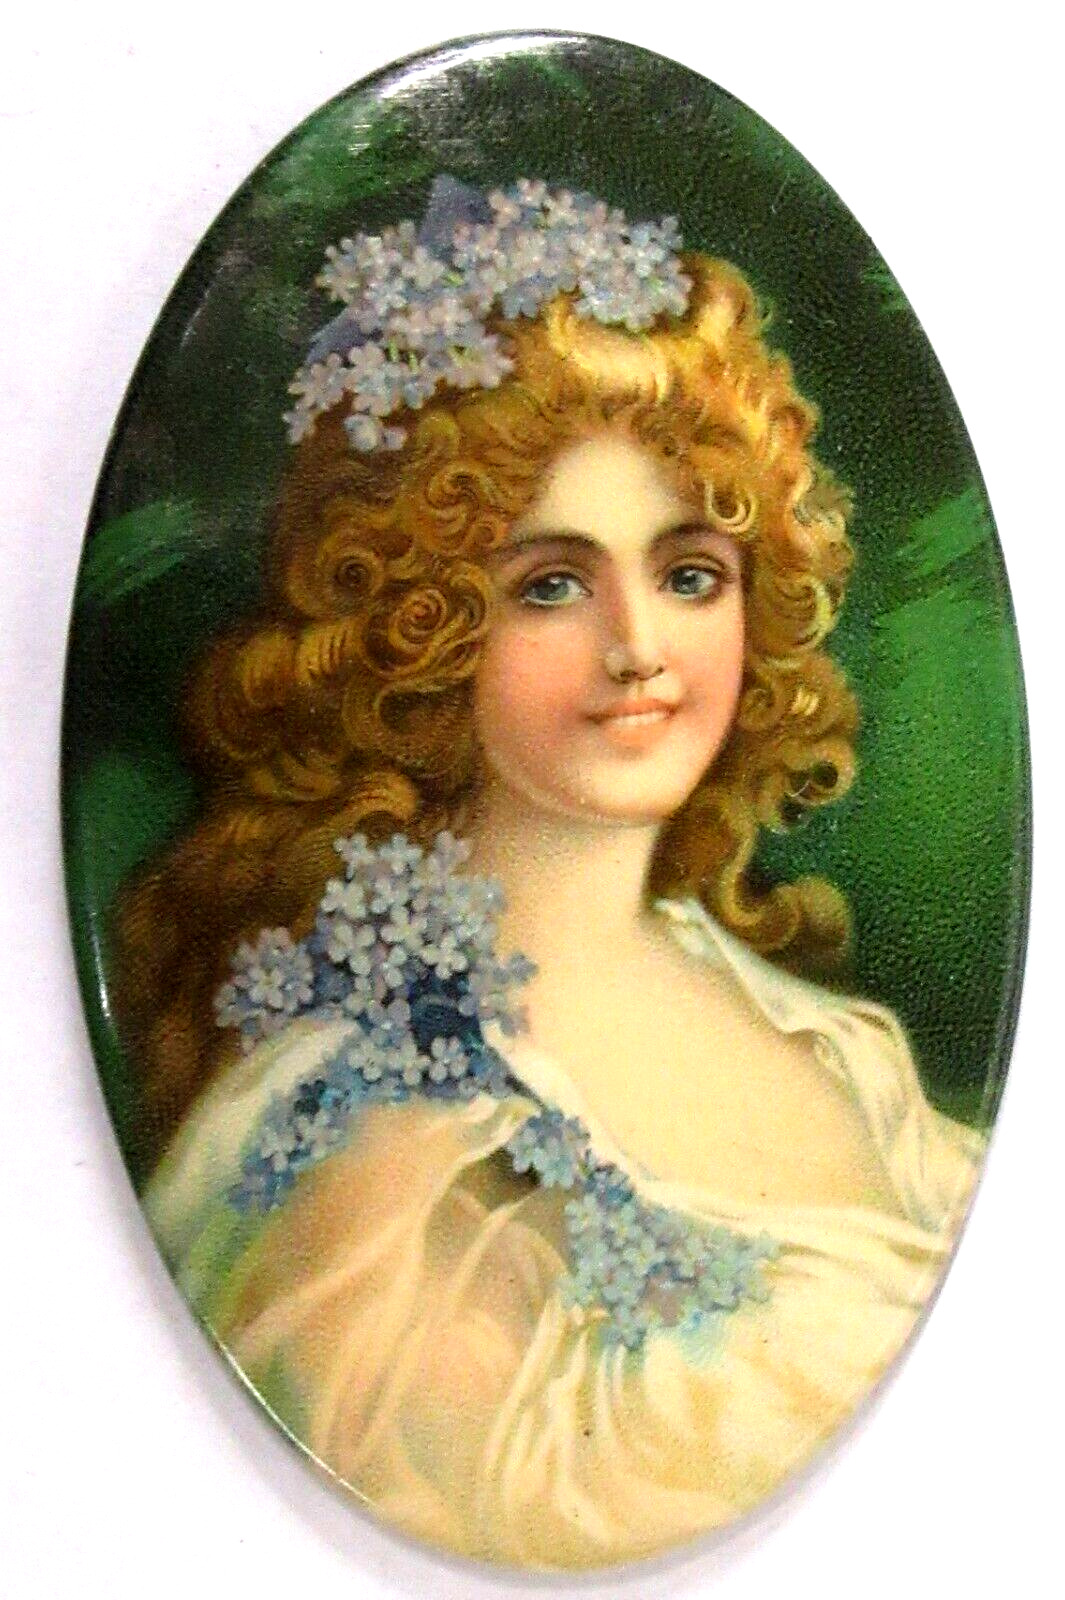 1890s PRETTY LADY holding blue flowers non-advertising celluloid pocket mirror ^